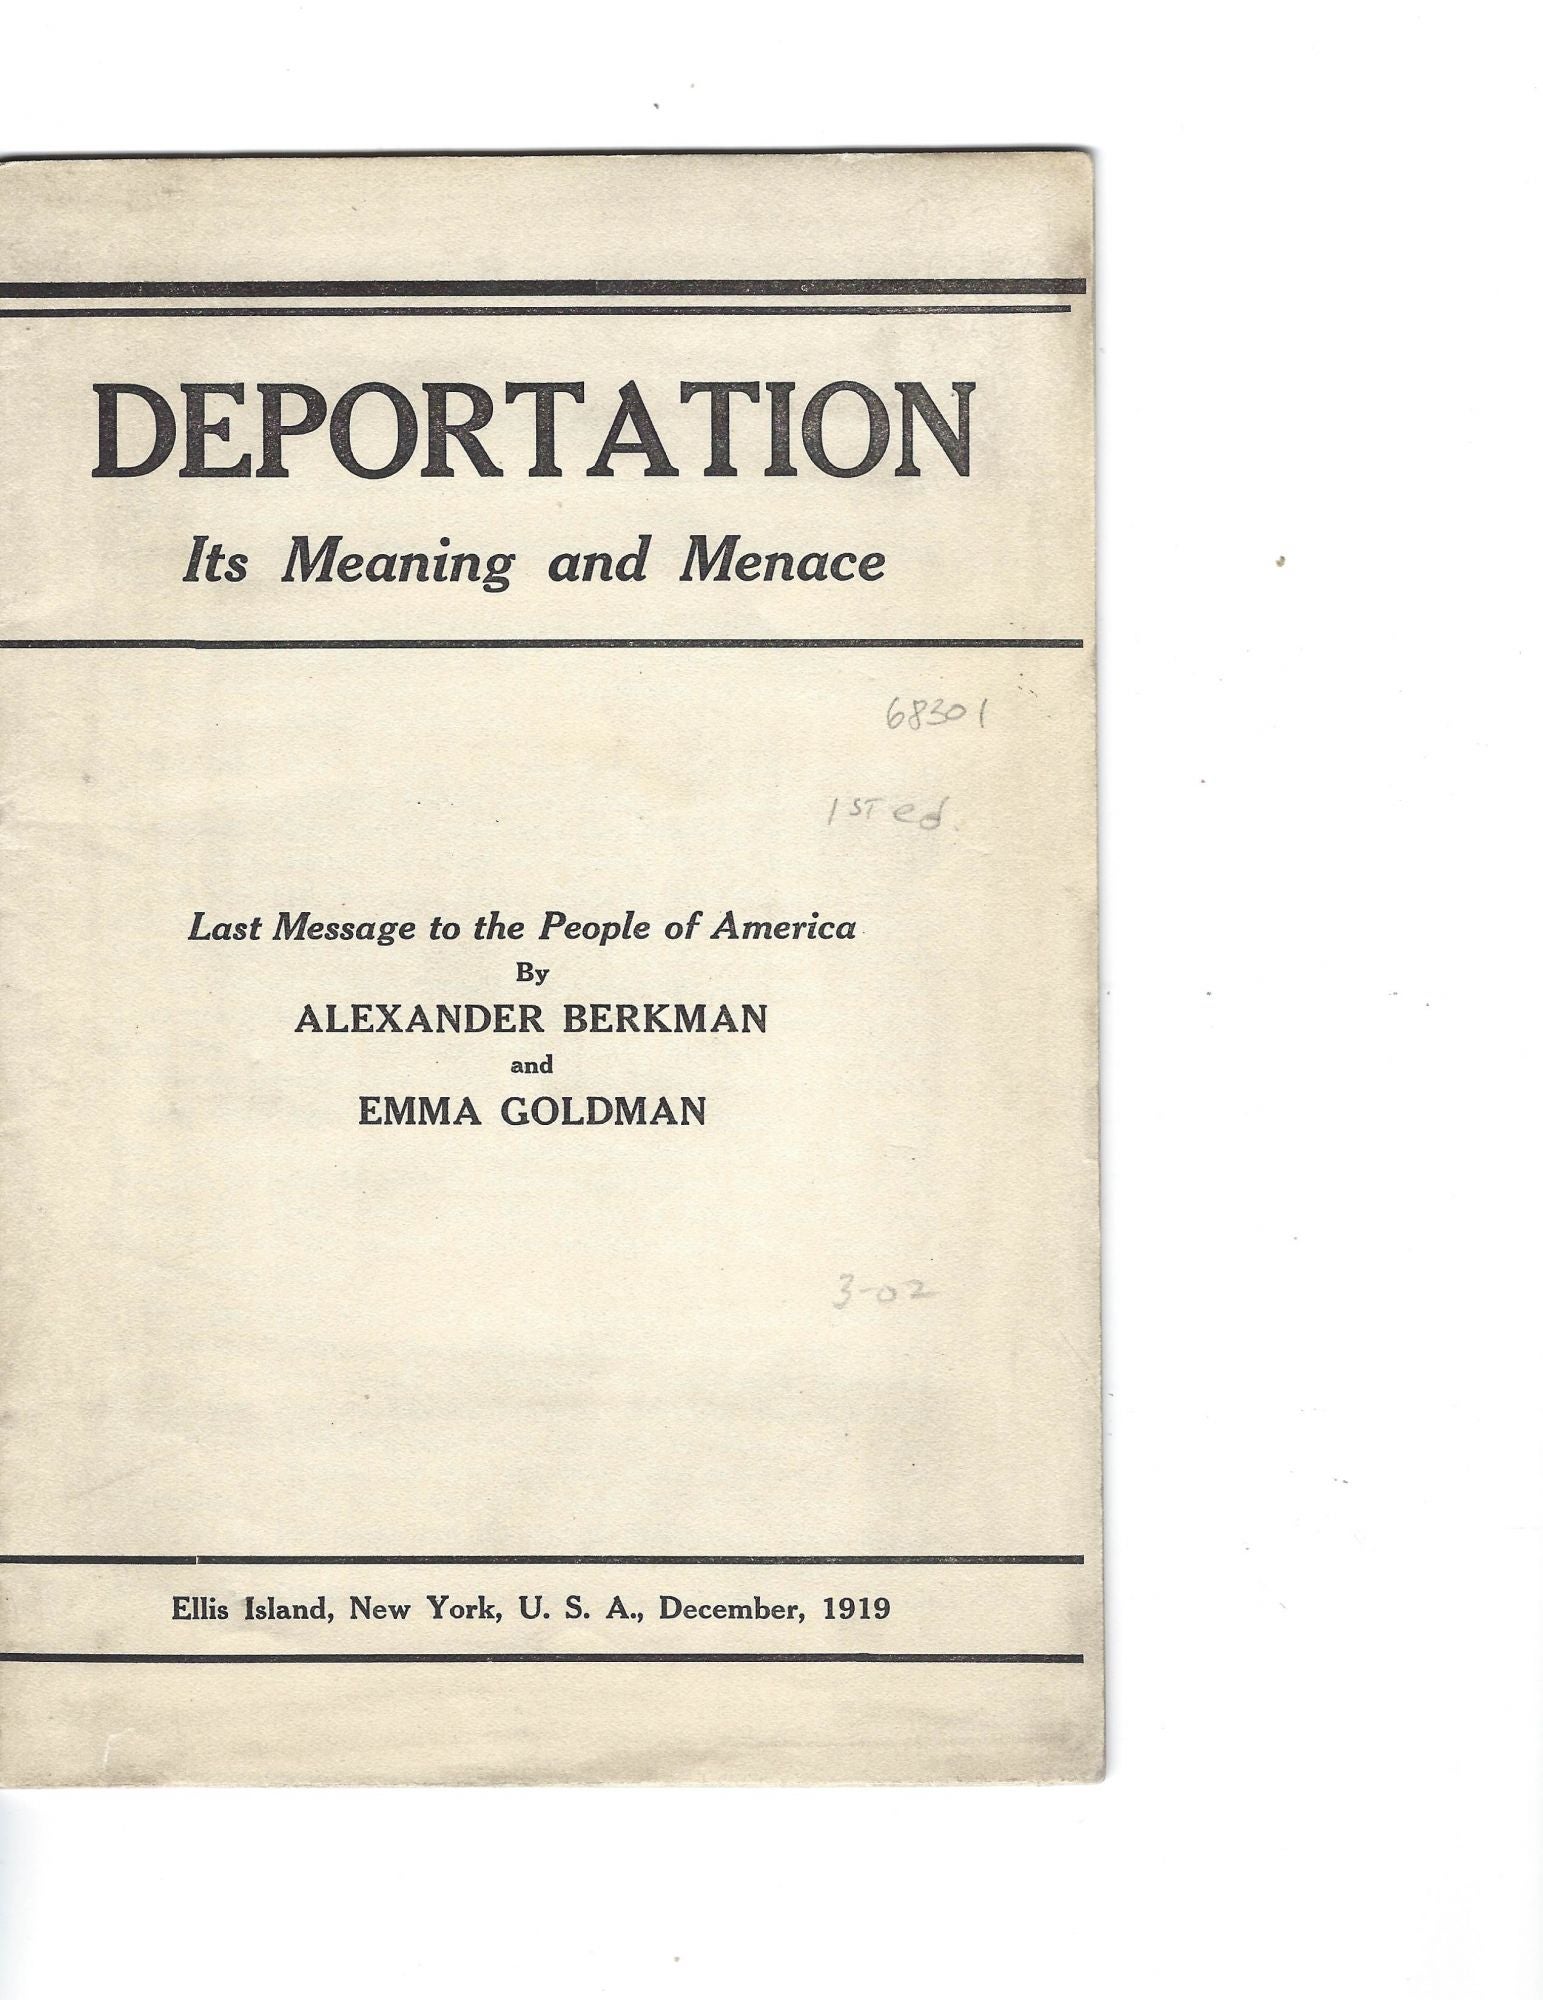 Deportation: Its Meaning and Menace, last message to the people of America  1919 by Emma Goldman Immigration, Berkman on Max Rambod